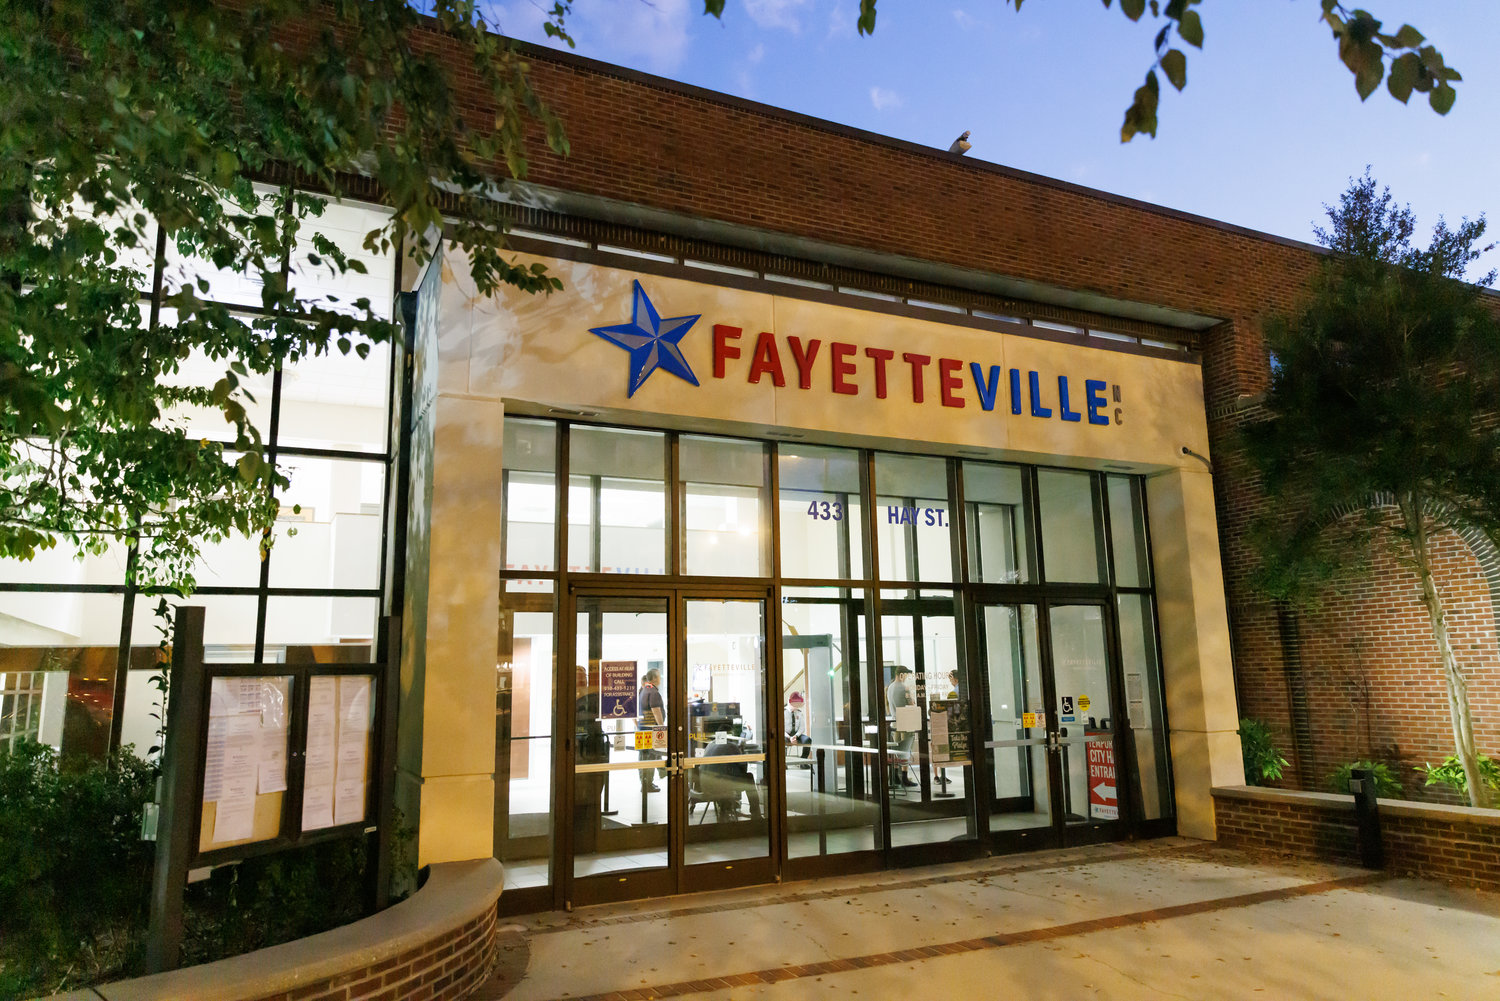 The Fayetteville City Council on Thursday voted to rename new halfway houses as “community reintegration centers.”